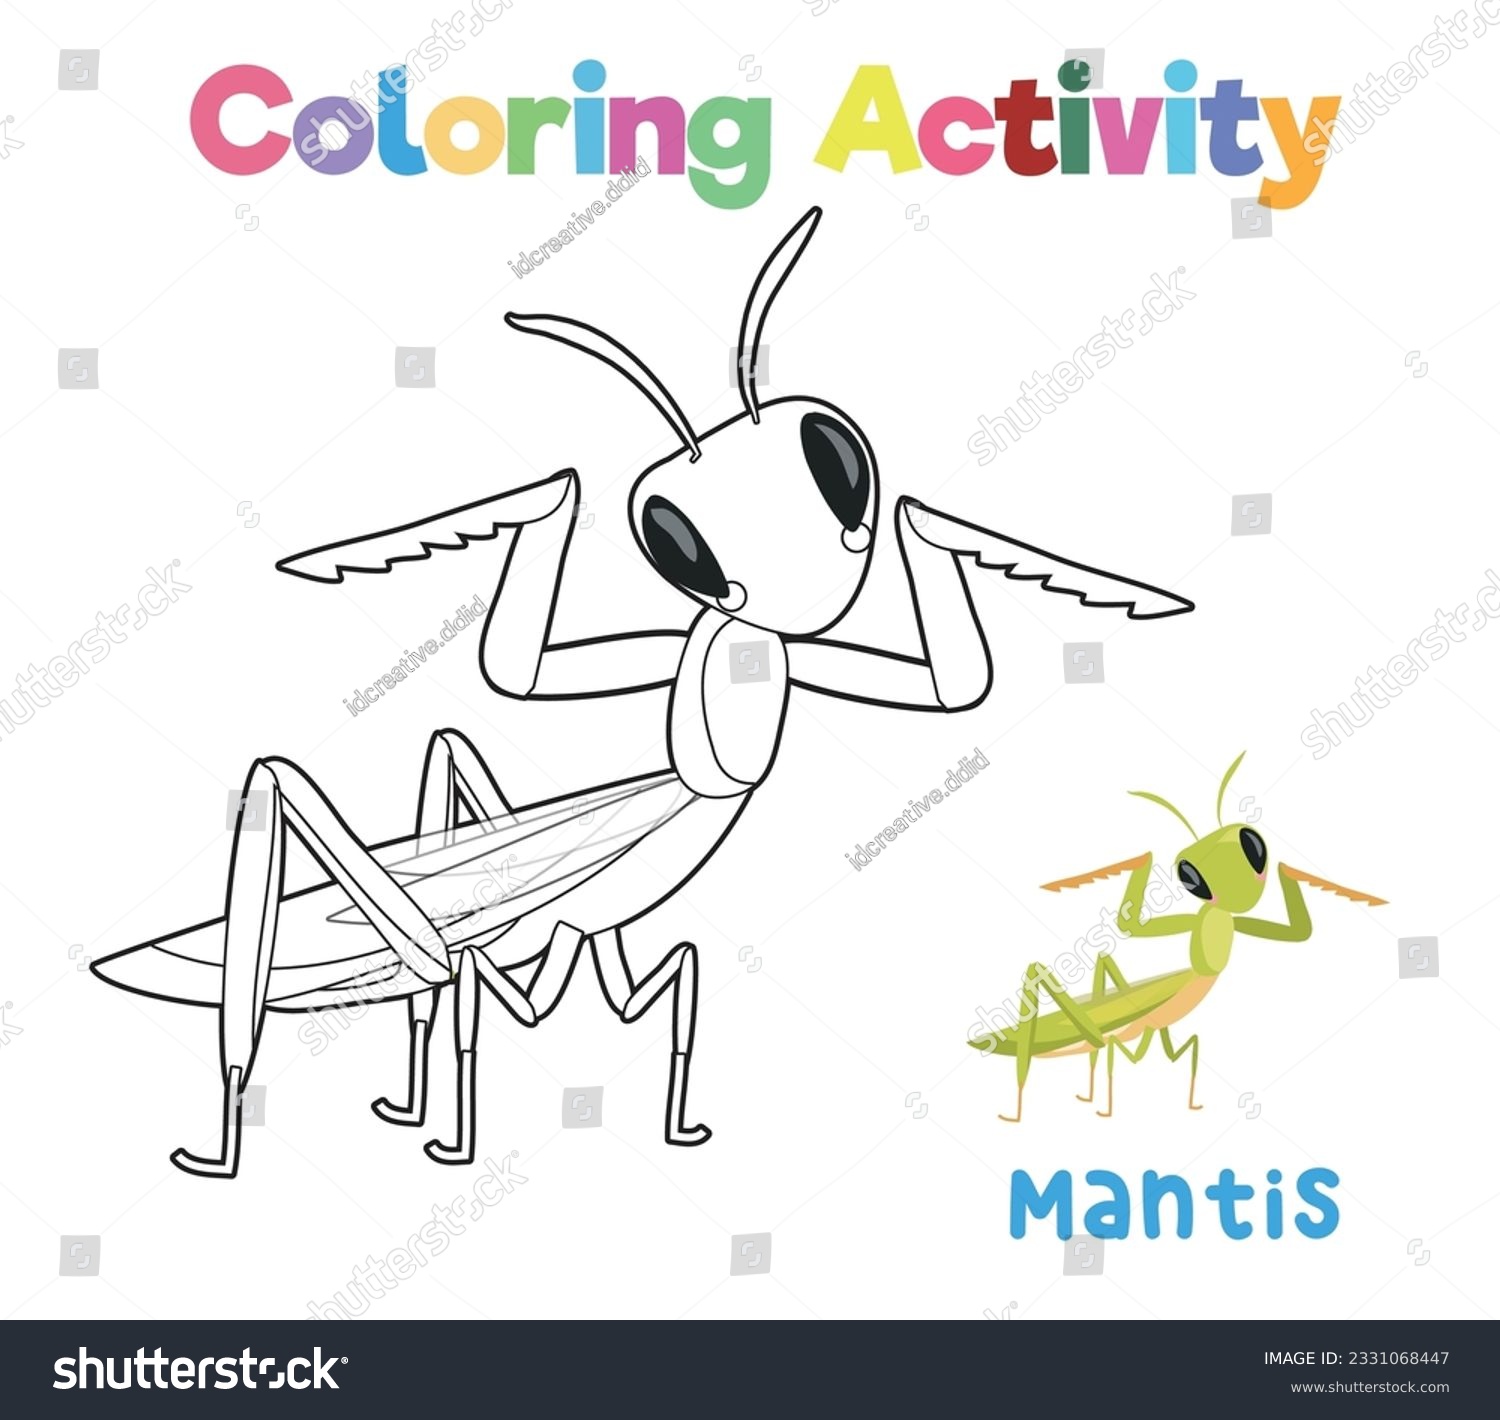 Coloring mantis colouring page insect coloring stock vector royalty free